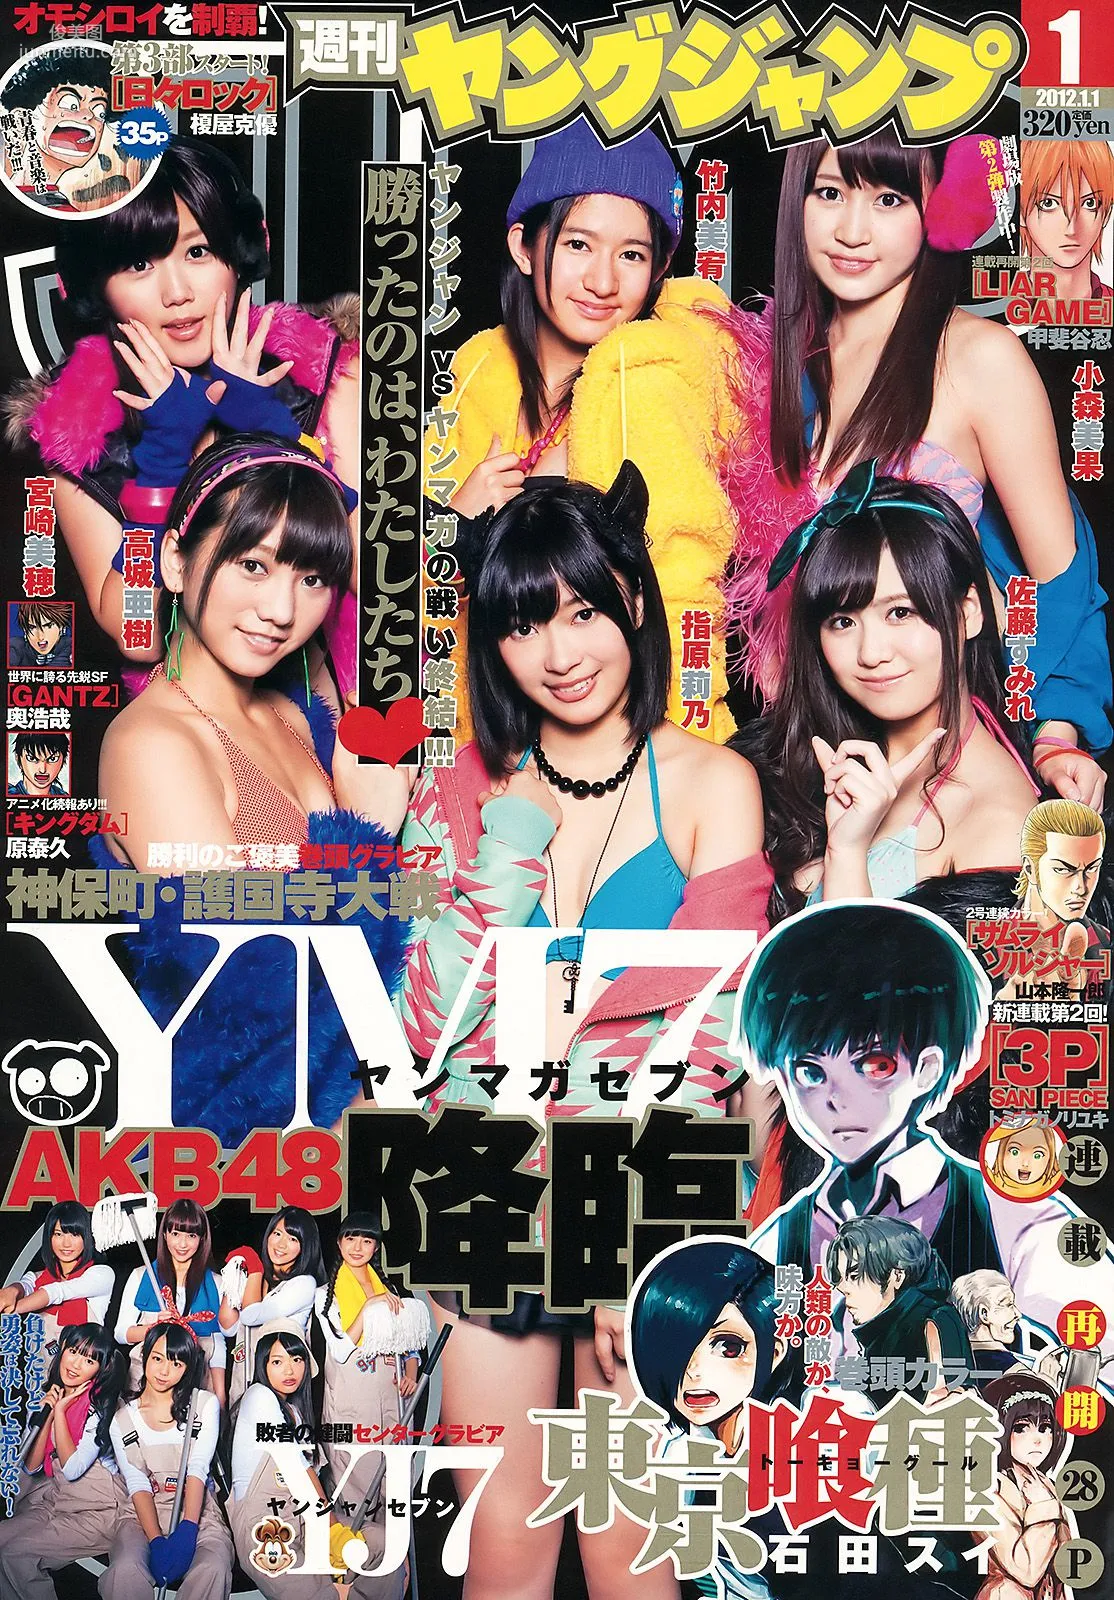 AKB48 YJ7 vs. YM7 神保町・護国寺大戦 FINAL PARTY [Weekly Young Jump] 2012年No.01 写真杂志1